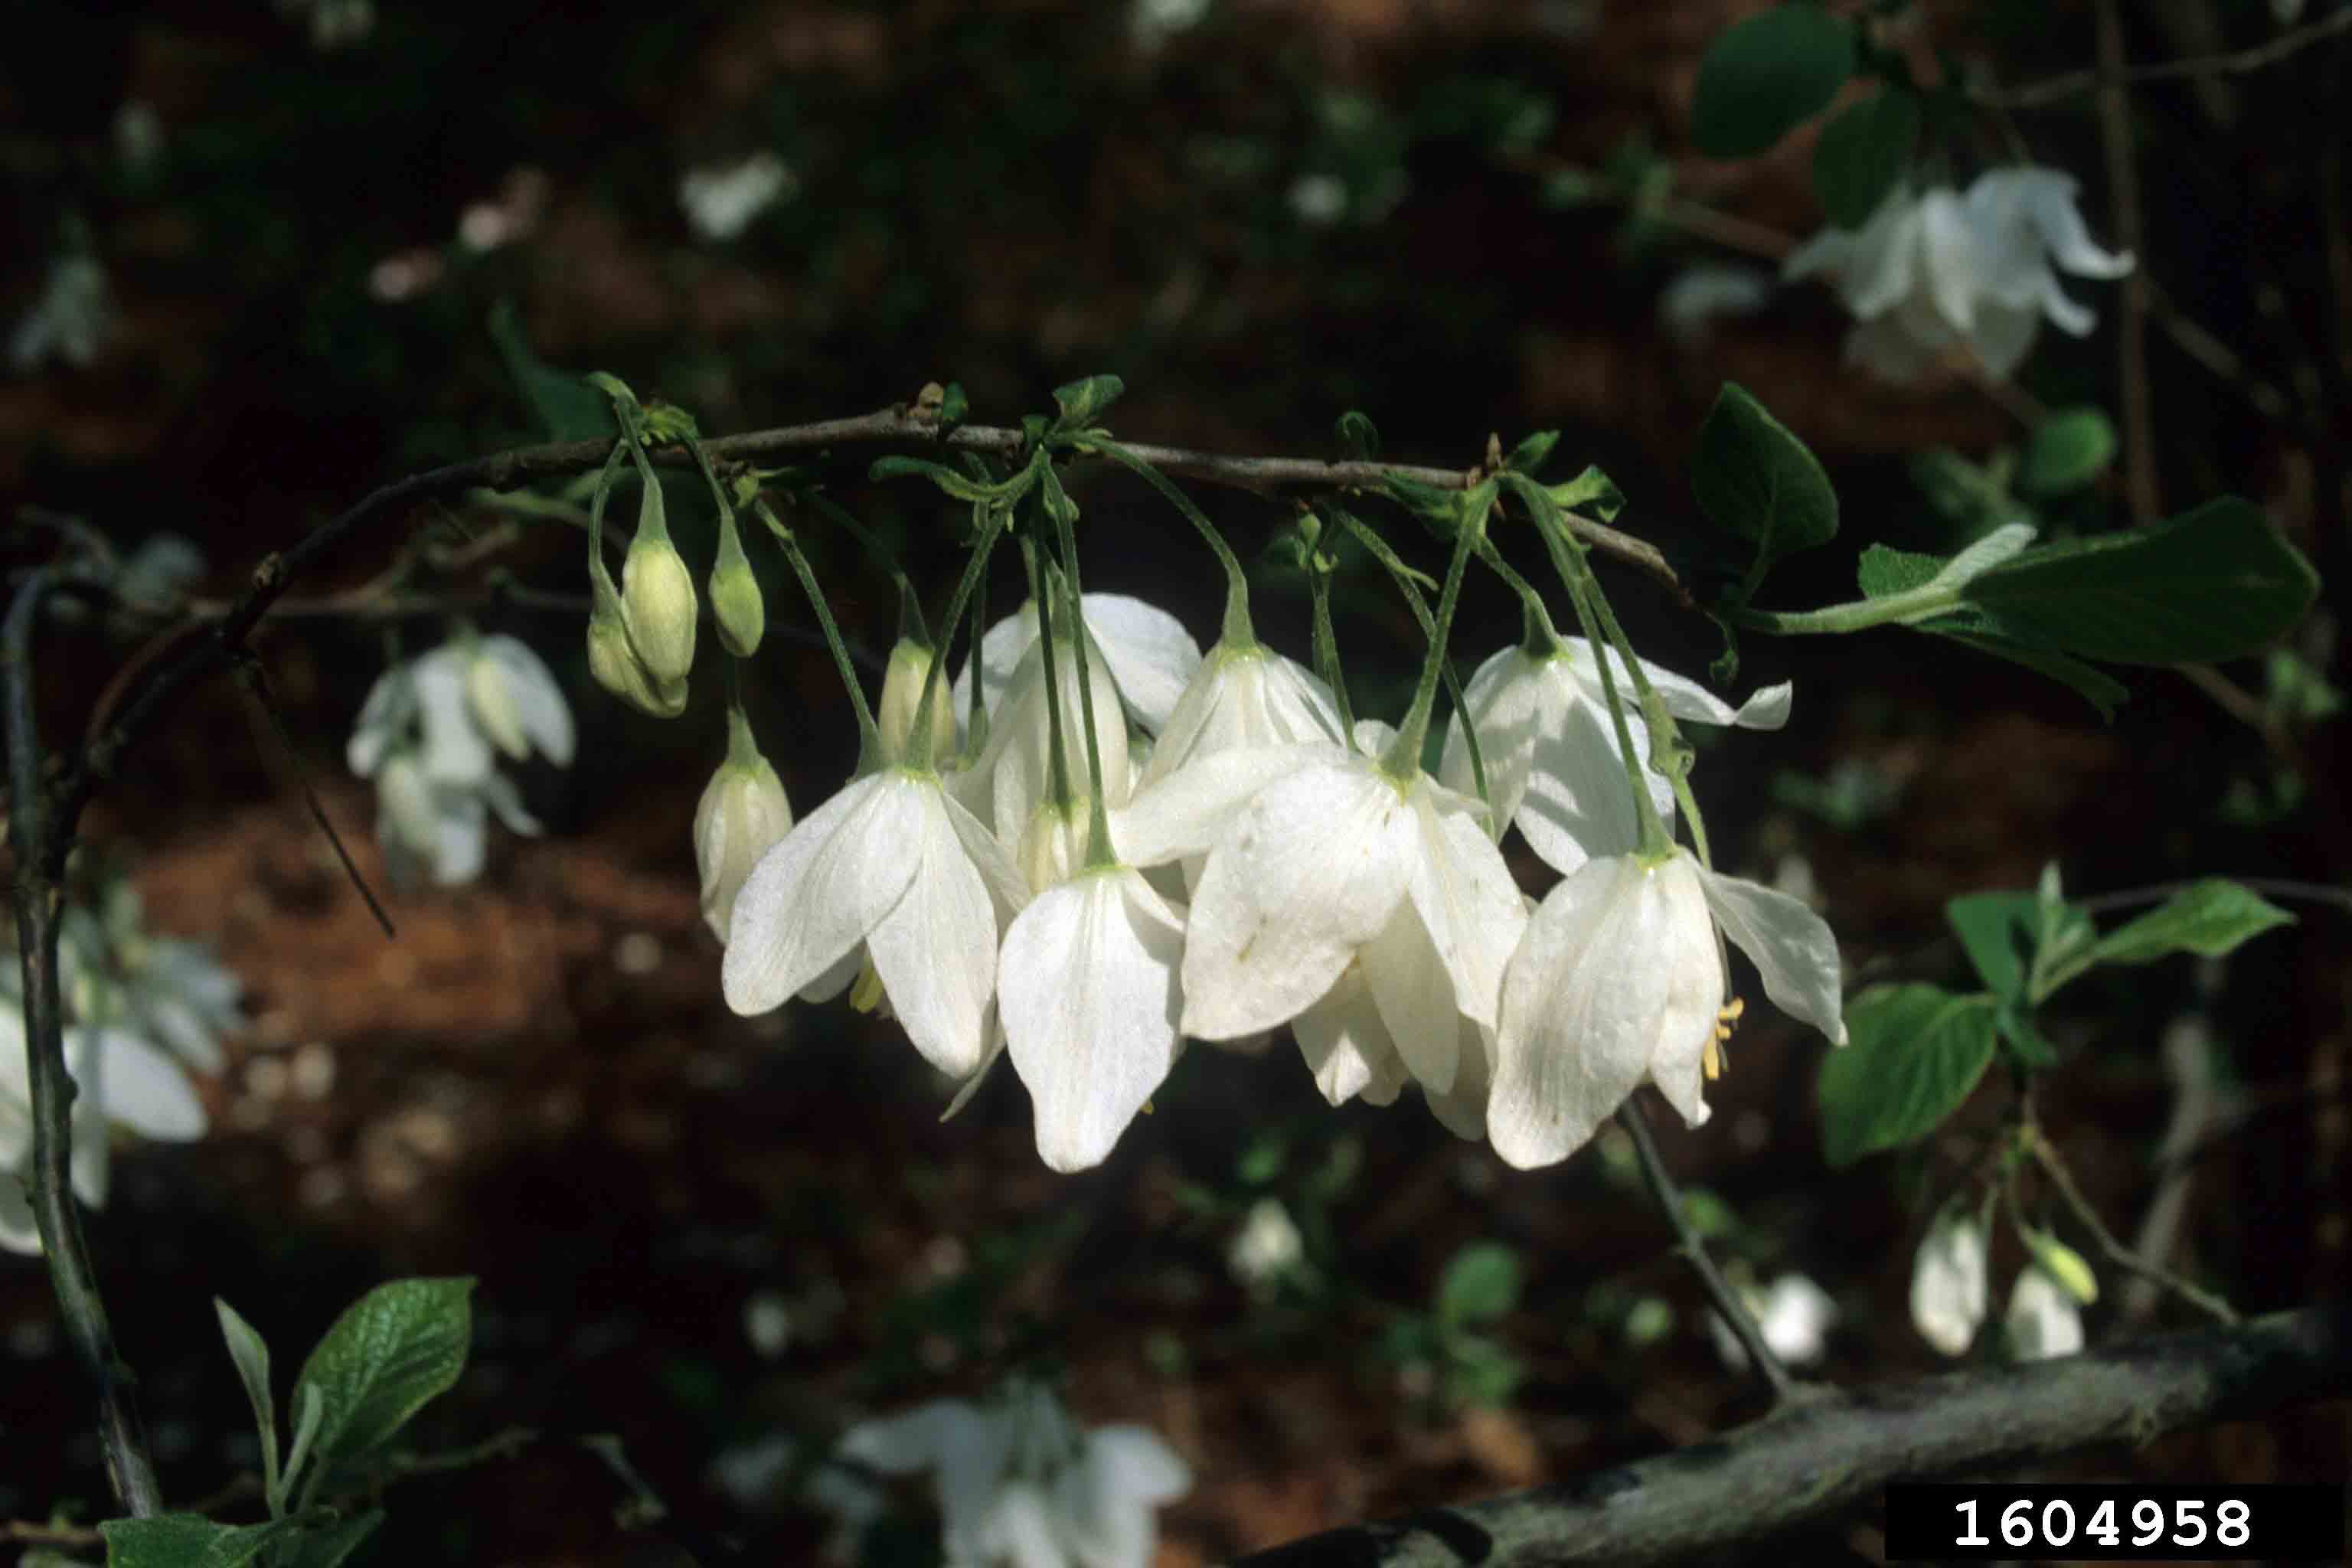 Two-winged silverbell flowers